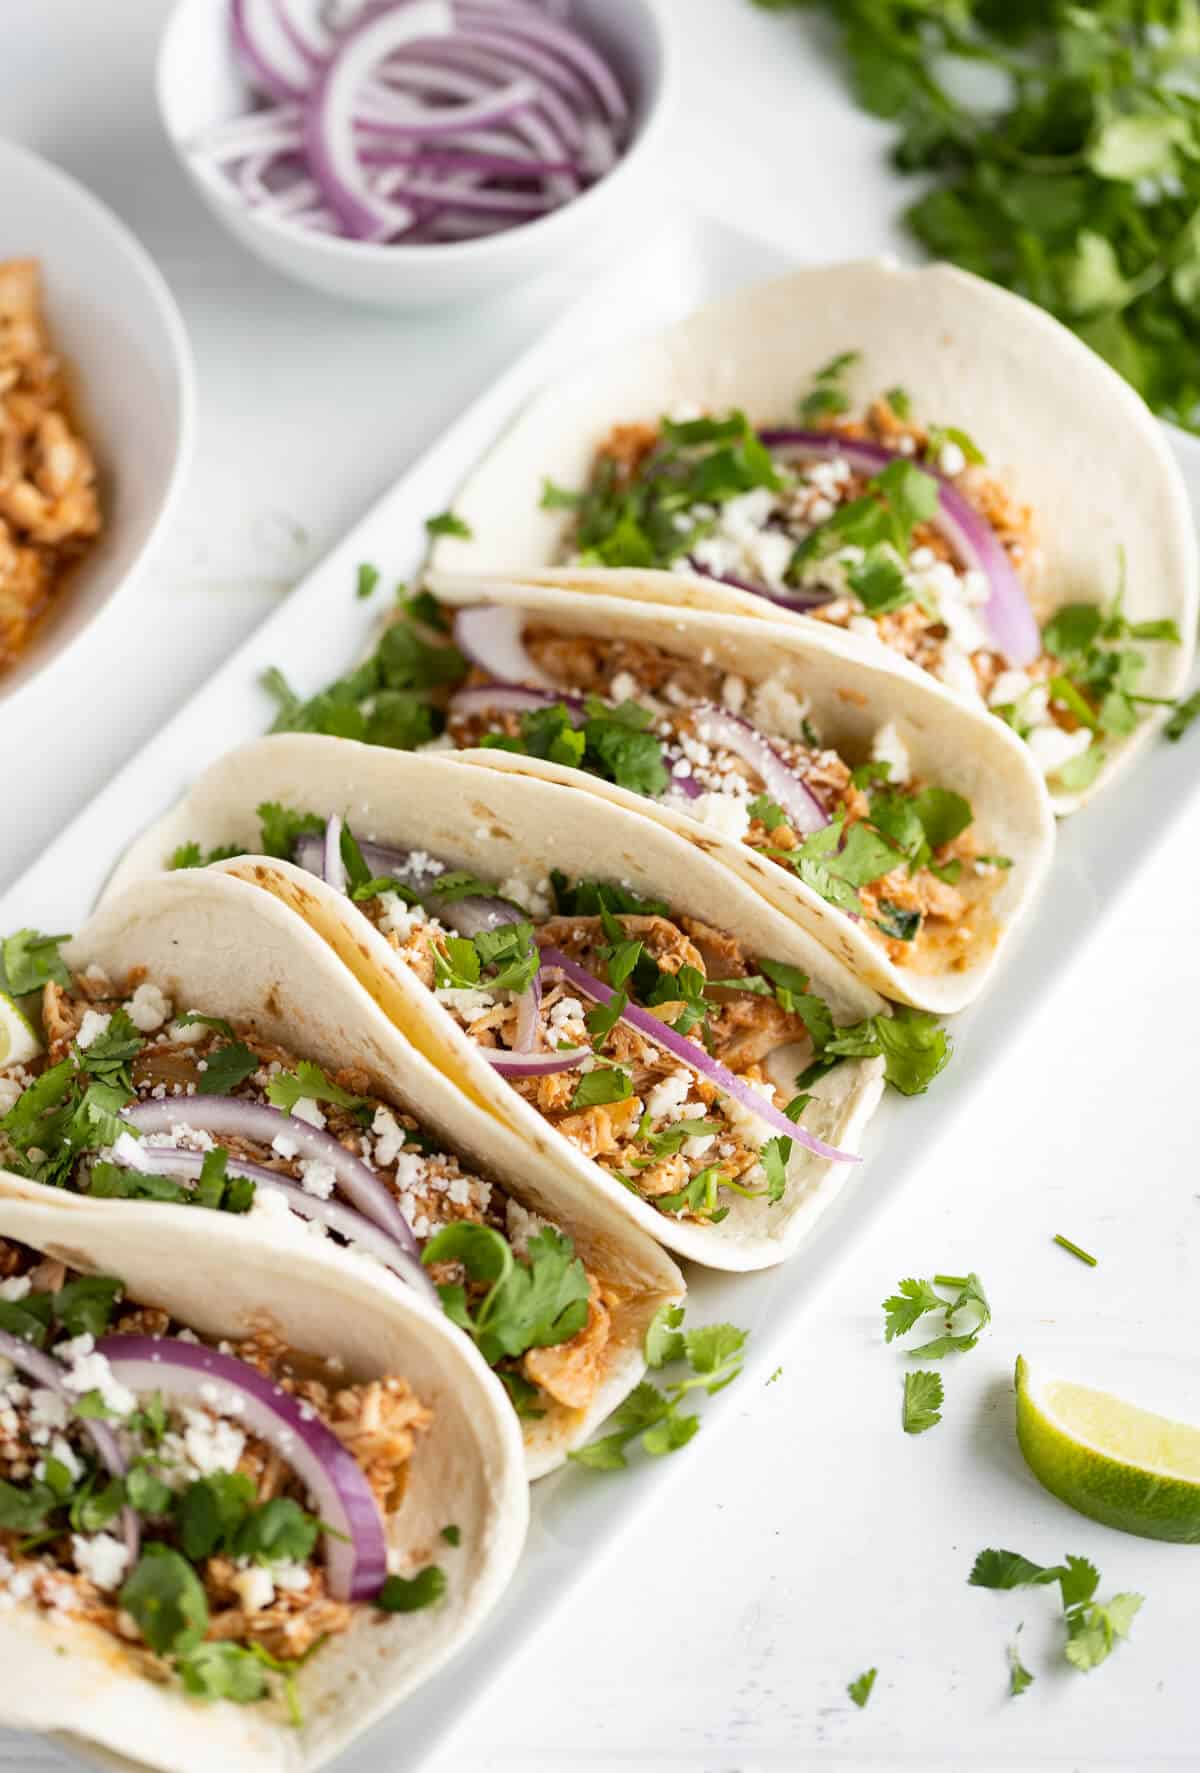 platter of soft tacos with chicken tinga, red onion, cheese, and cilantro